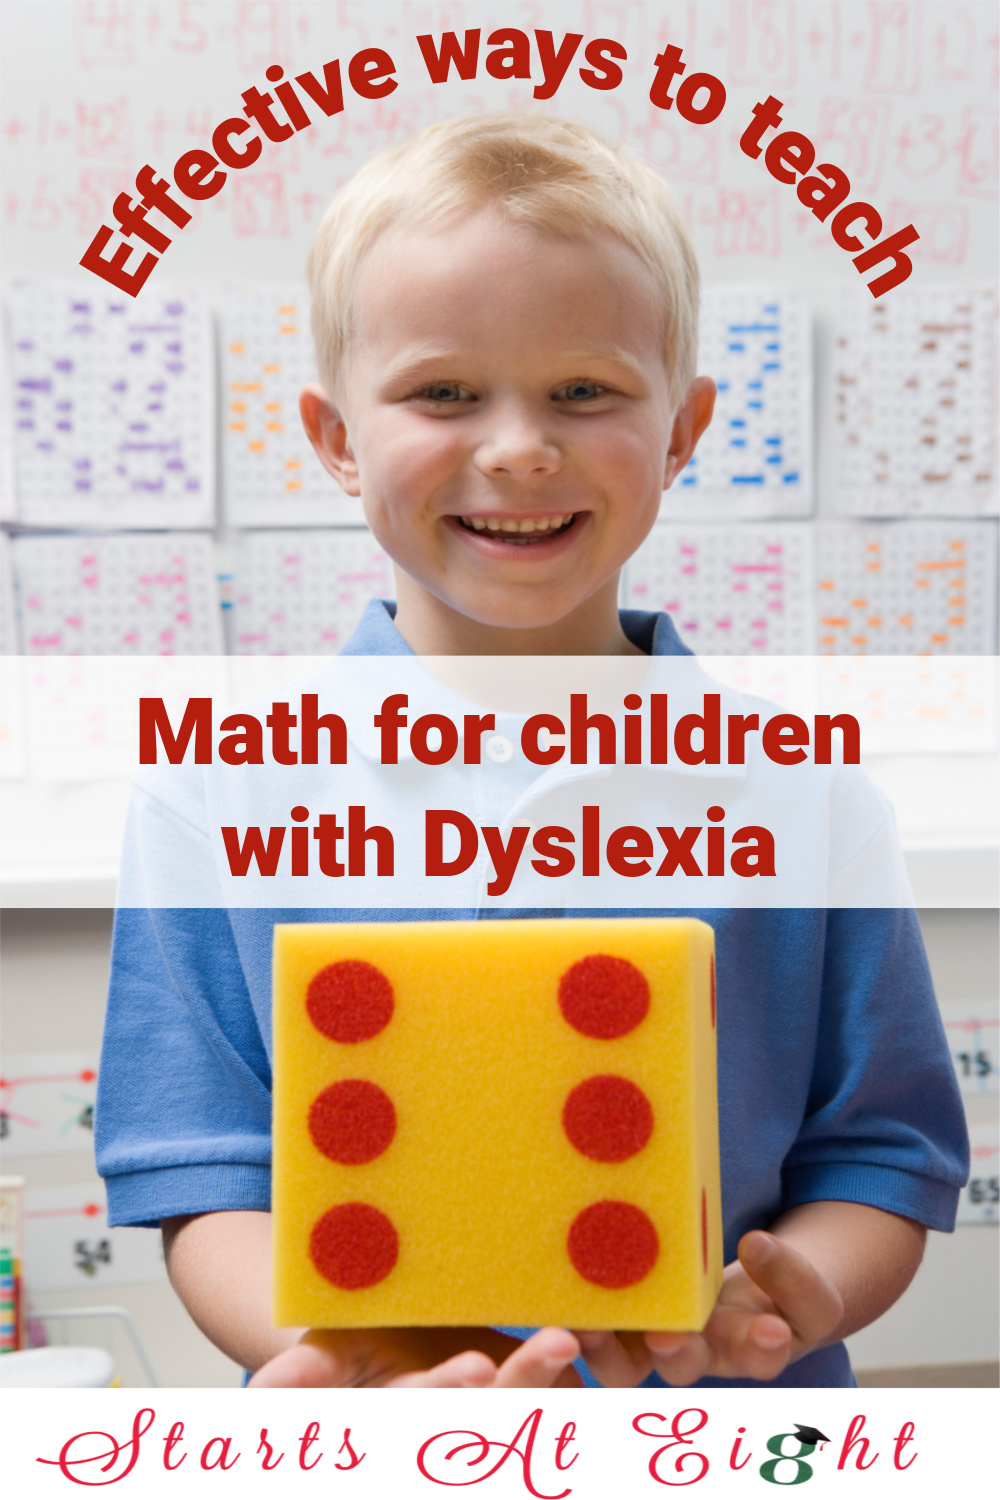 Effective Ways to Teach Math for Children with Dyslexia offers techniques for helping kids with dyslexia tackle math. From Starts At Eight